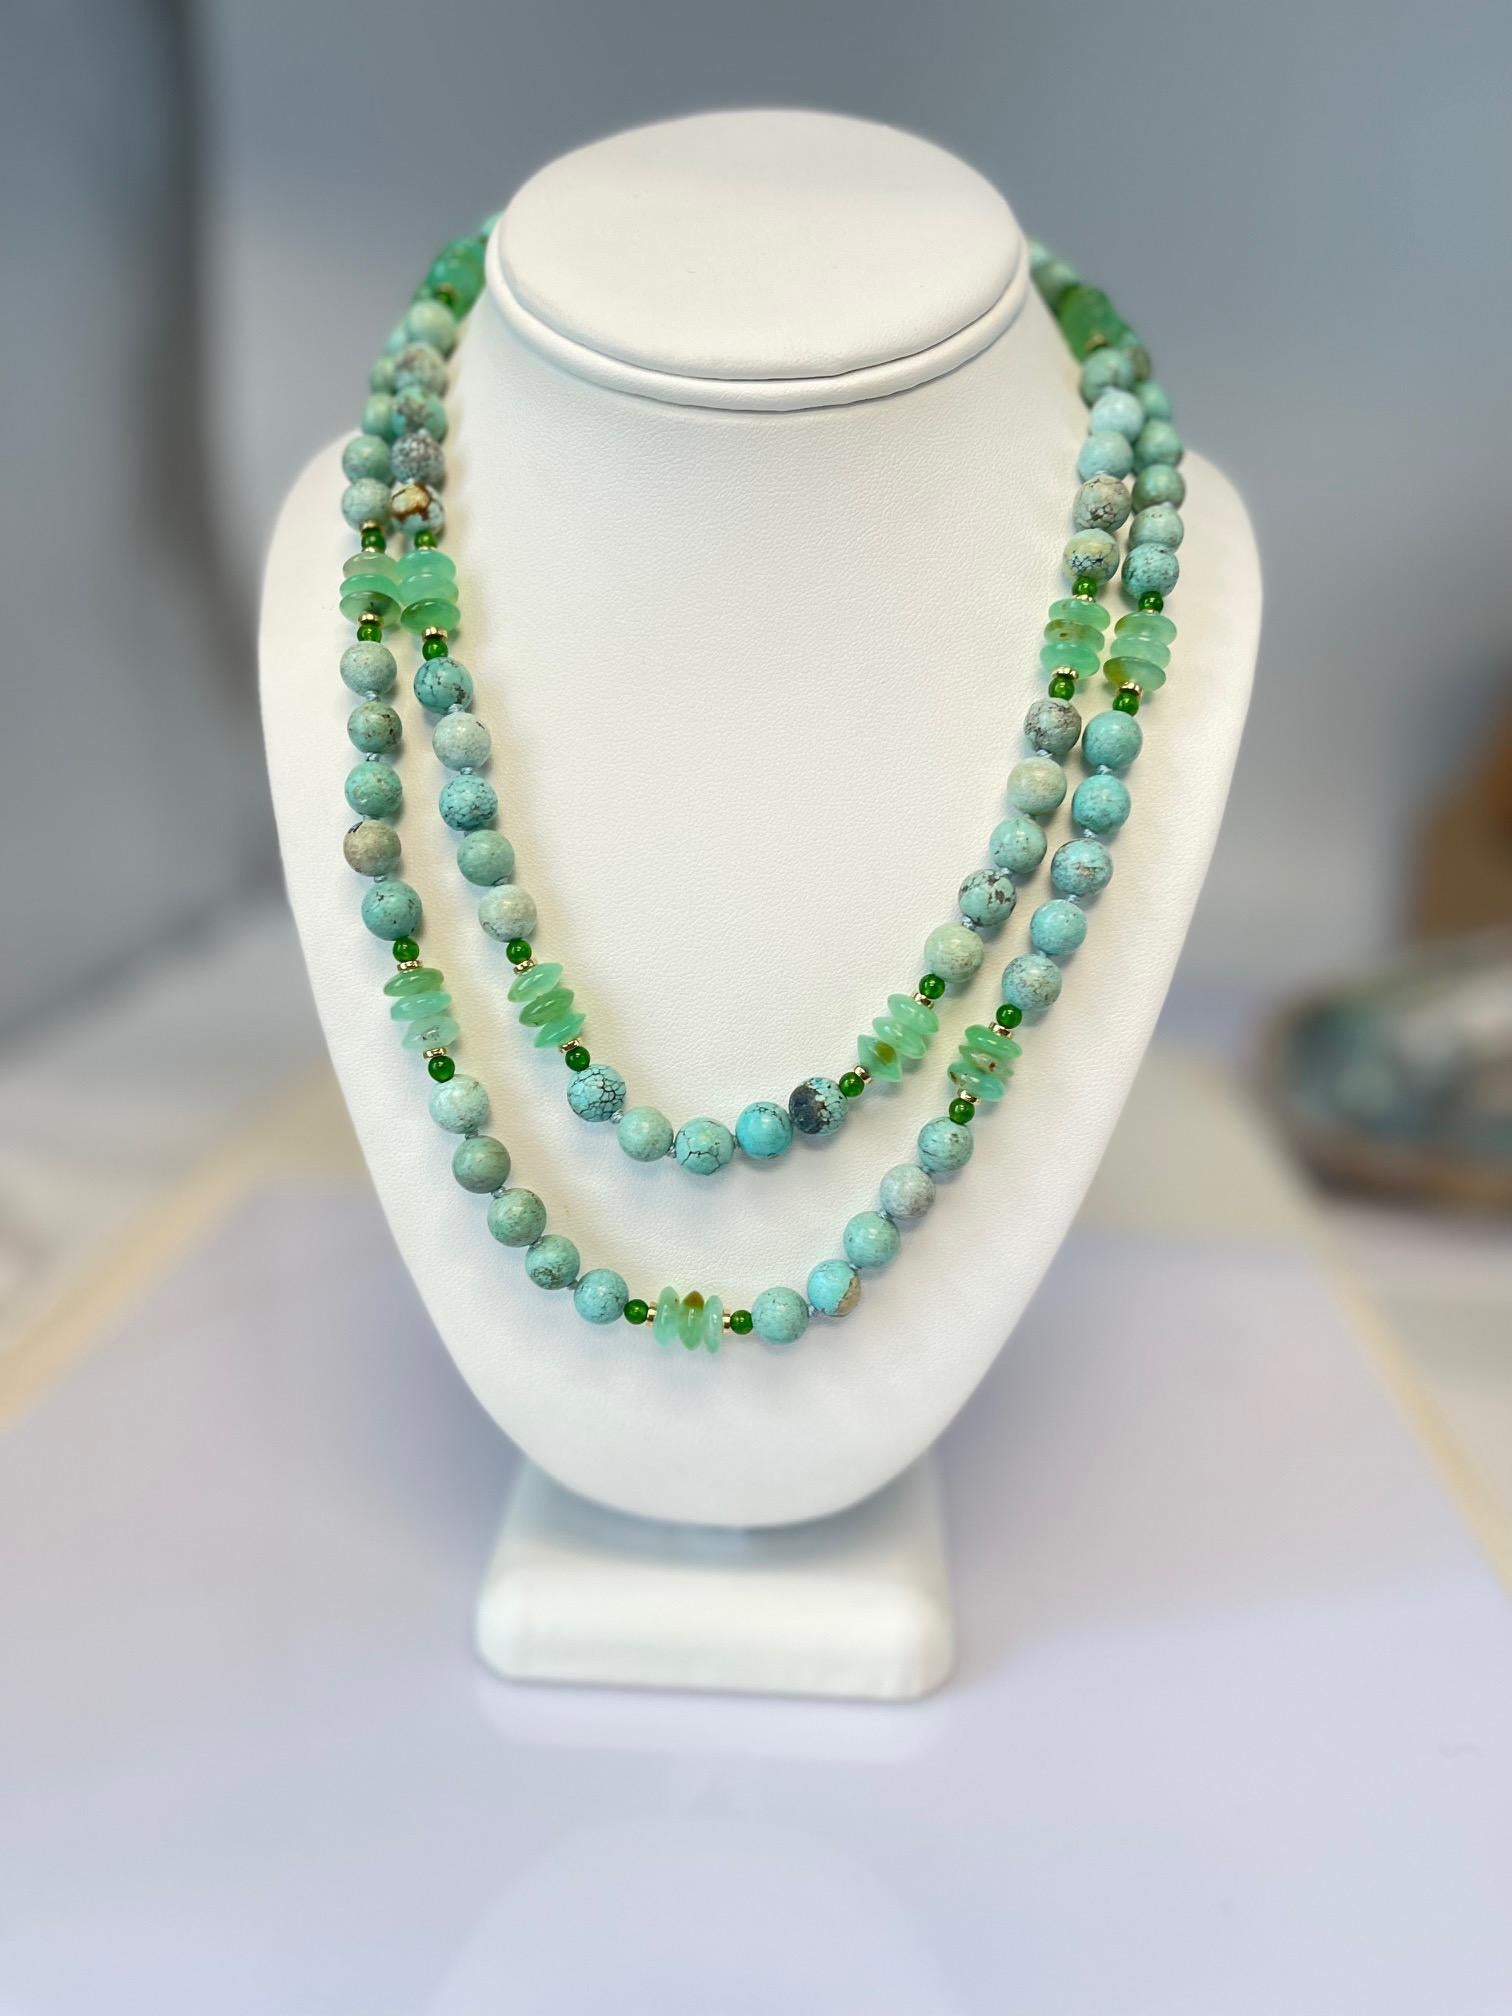 Turquoise, Chrome Diopside and Chrysoprase Necklace, 21 Inches For Sale 2